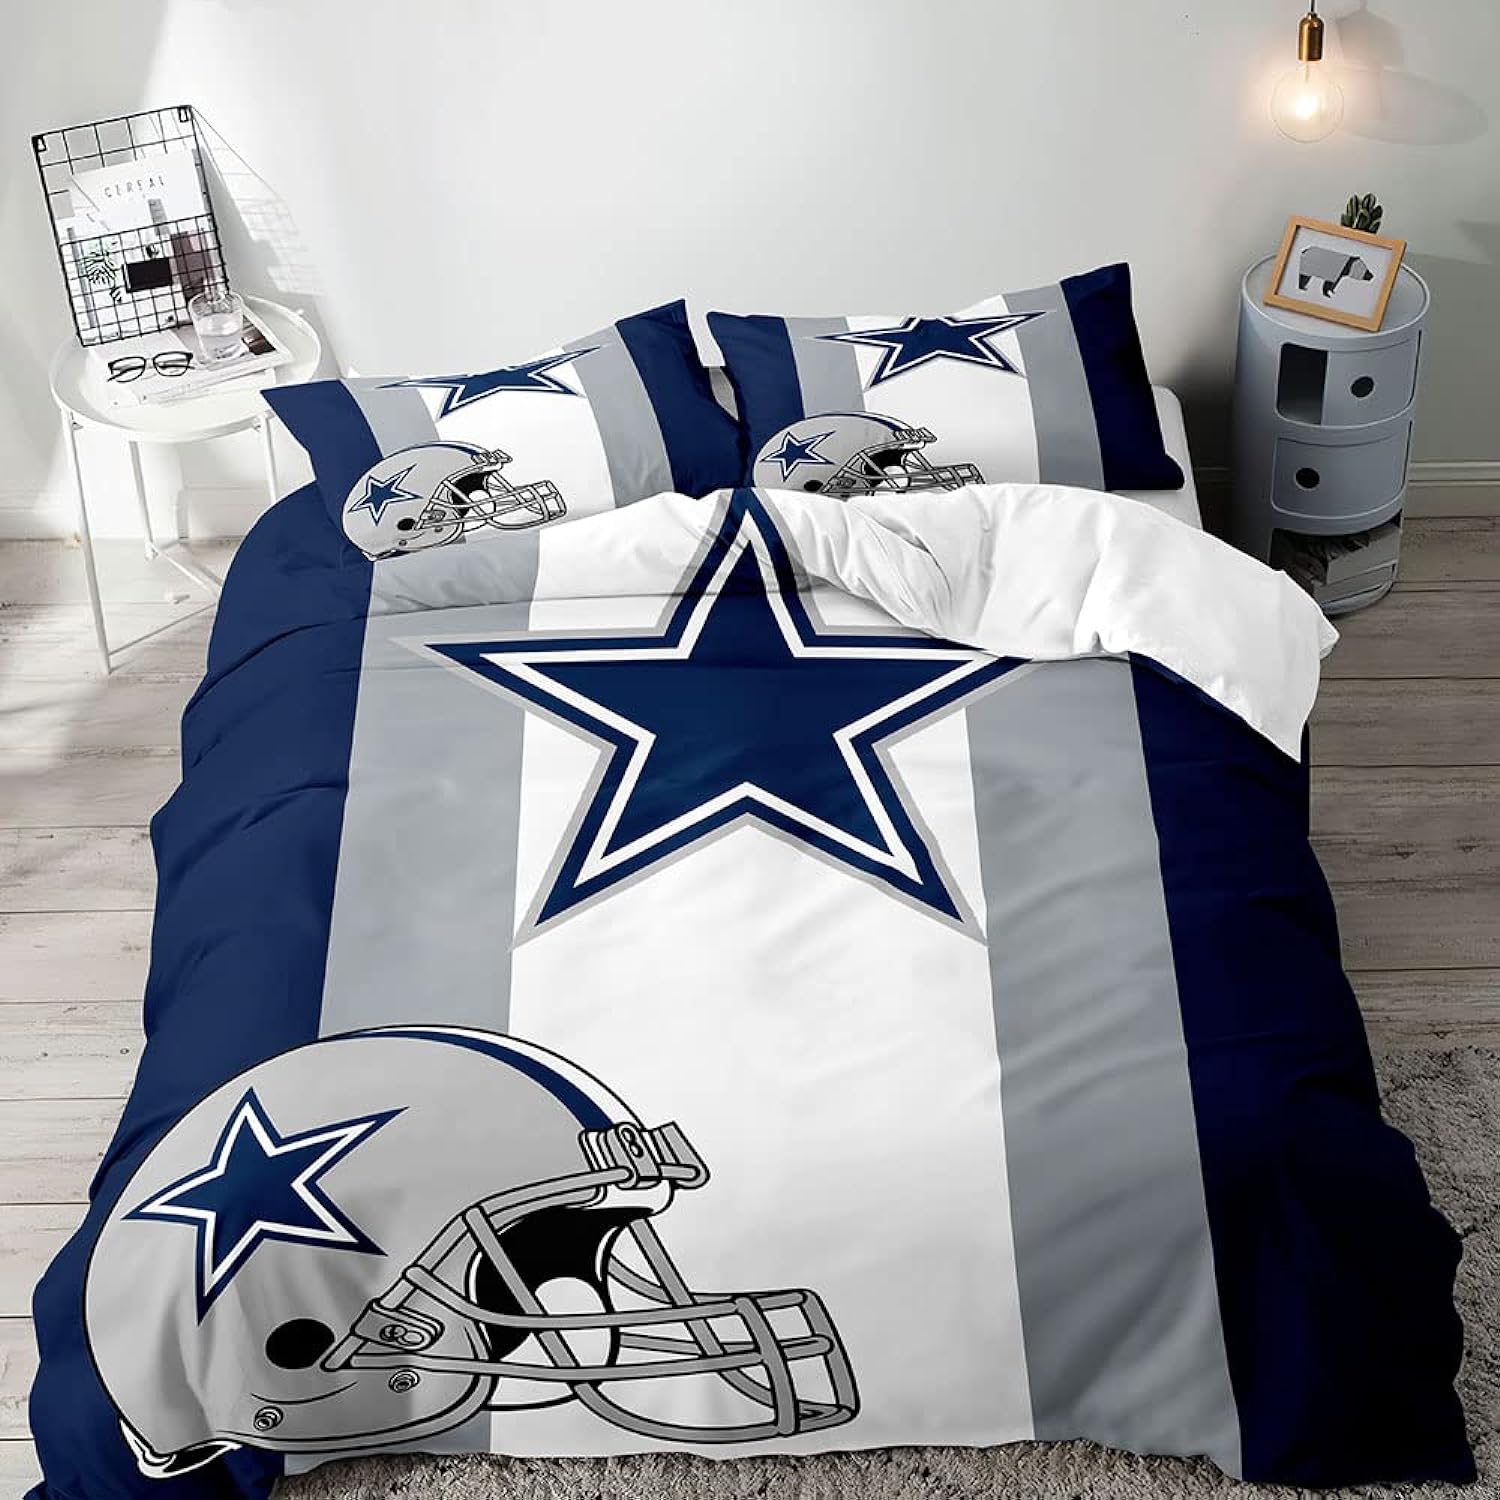 Great Choice Products Vivihome 2Pcs American Football Duvet Cover Set, Twin Bedding Sets, Sports Bedding, Grey White Navy Blue Striped Comforter Co…